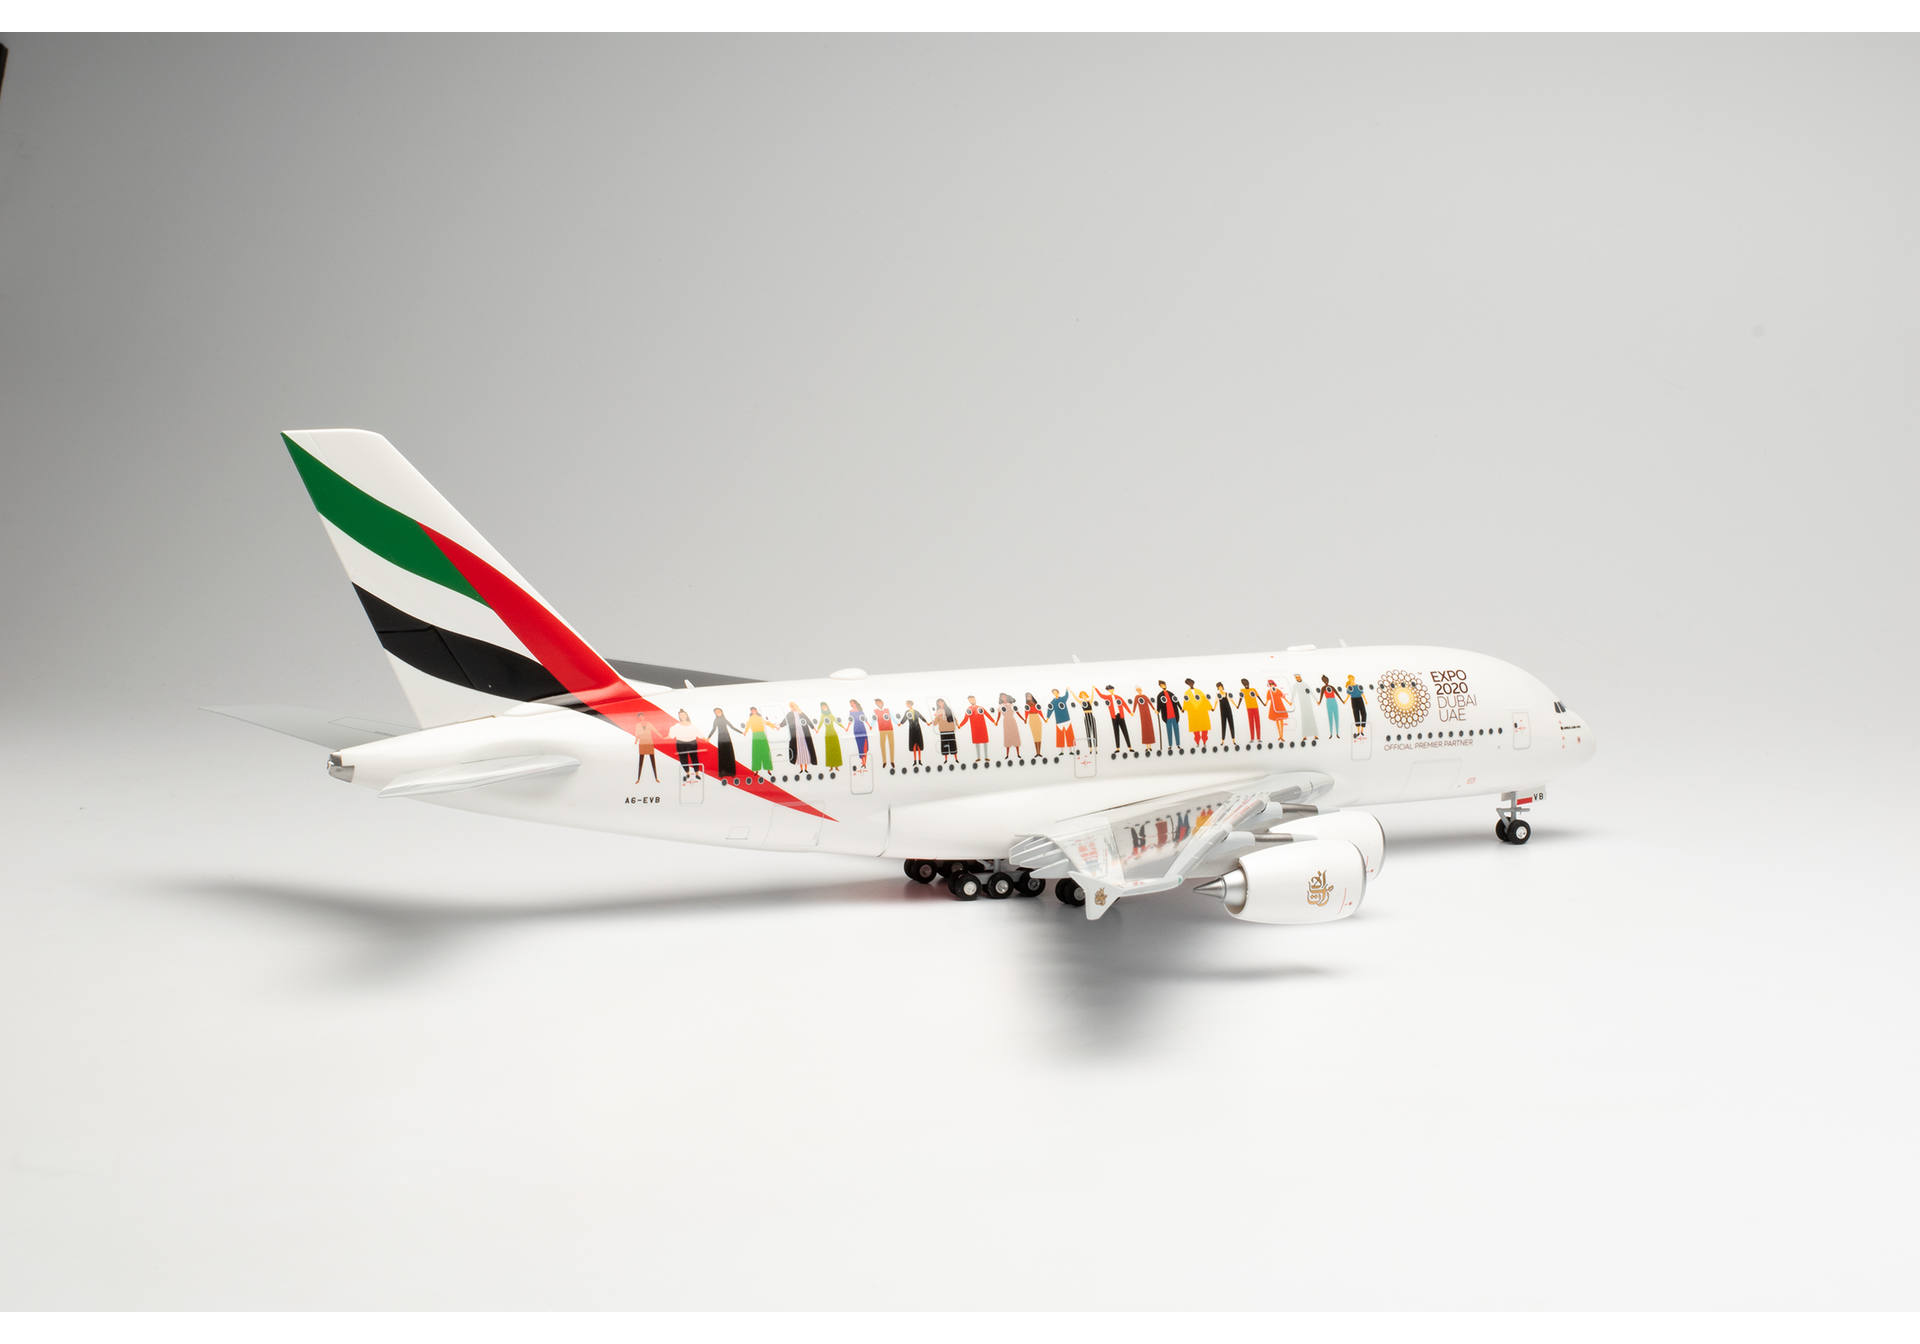 Emirates Airbus A380 “Year of Tolerance“ – A6-EVB